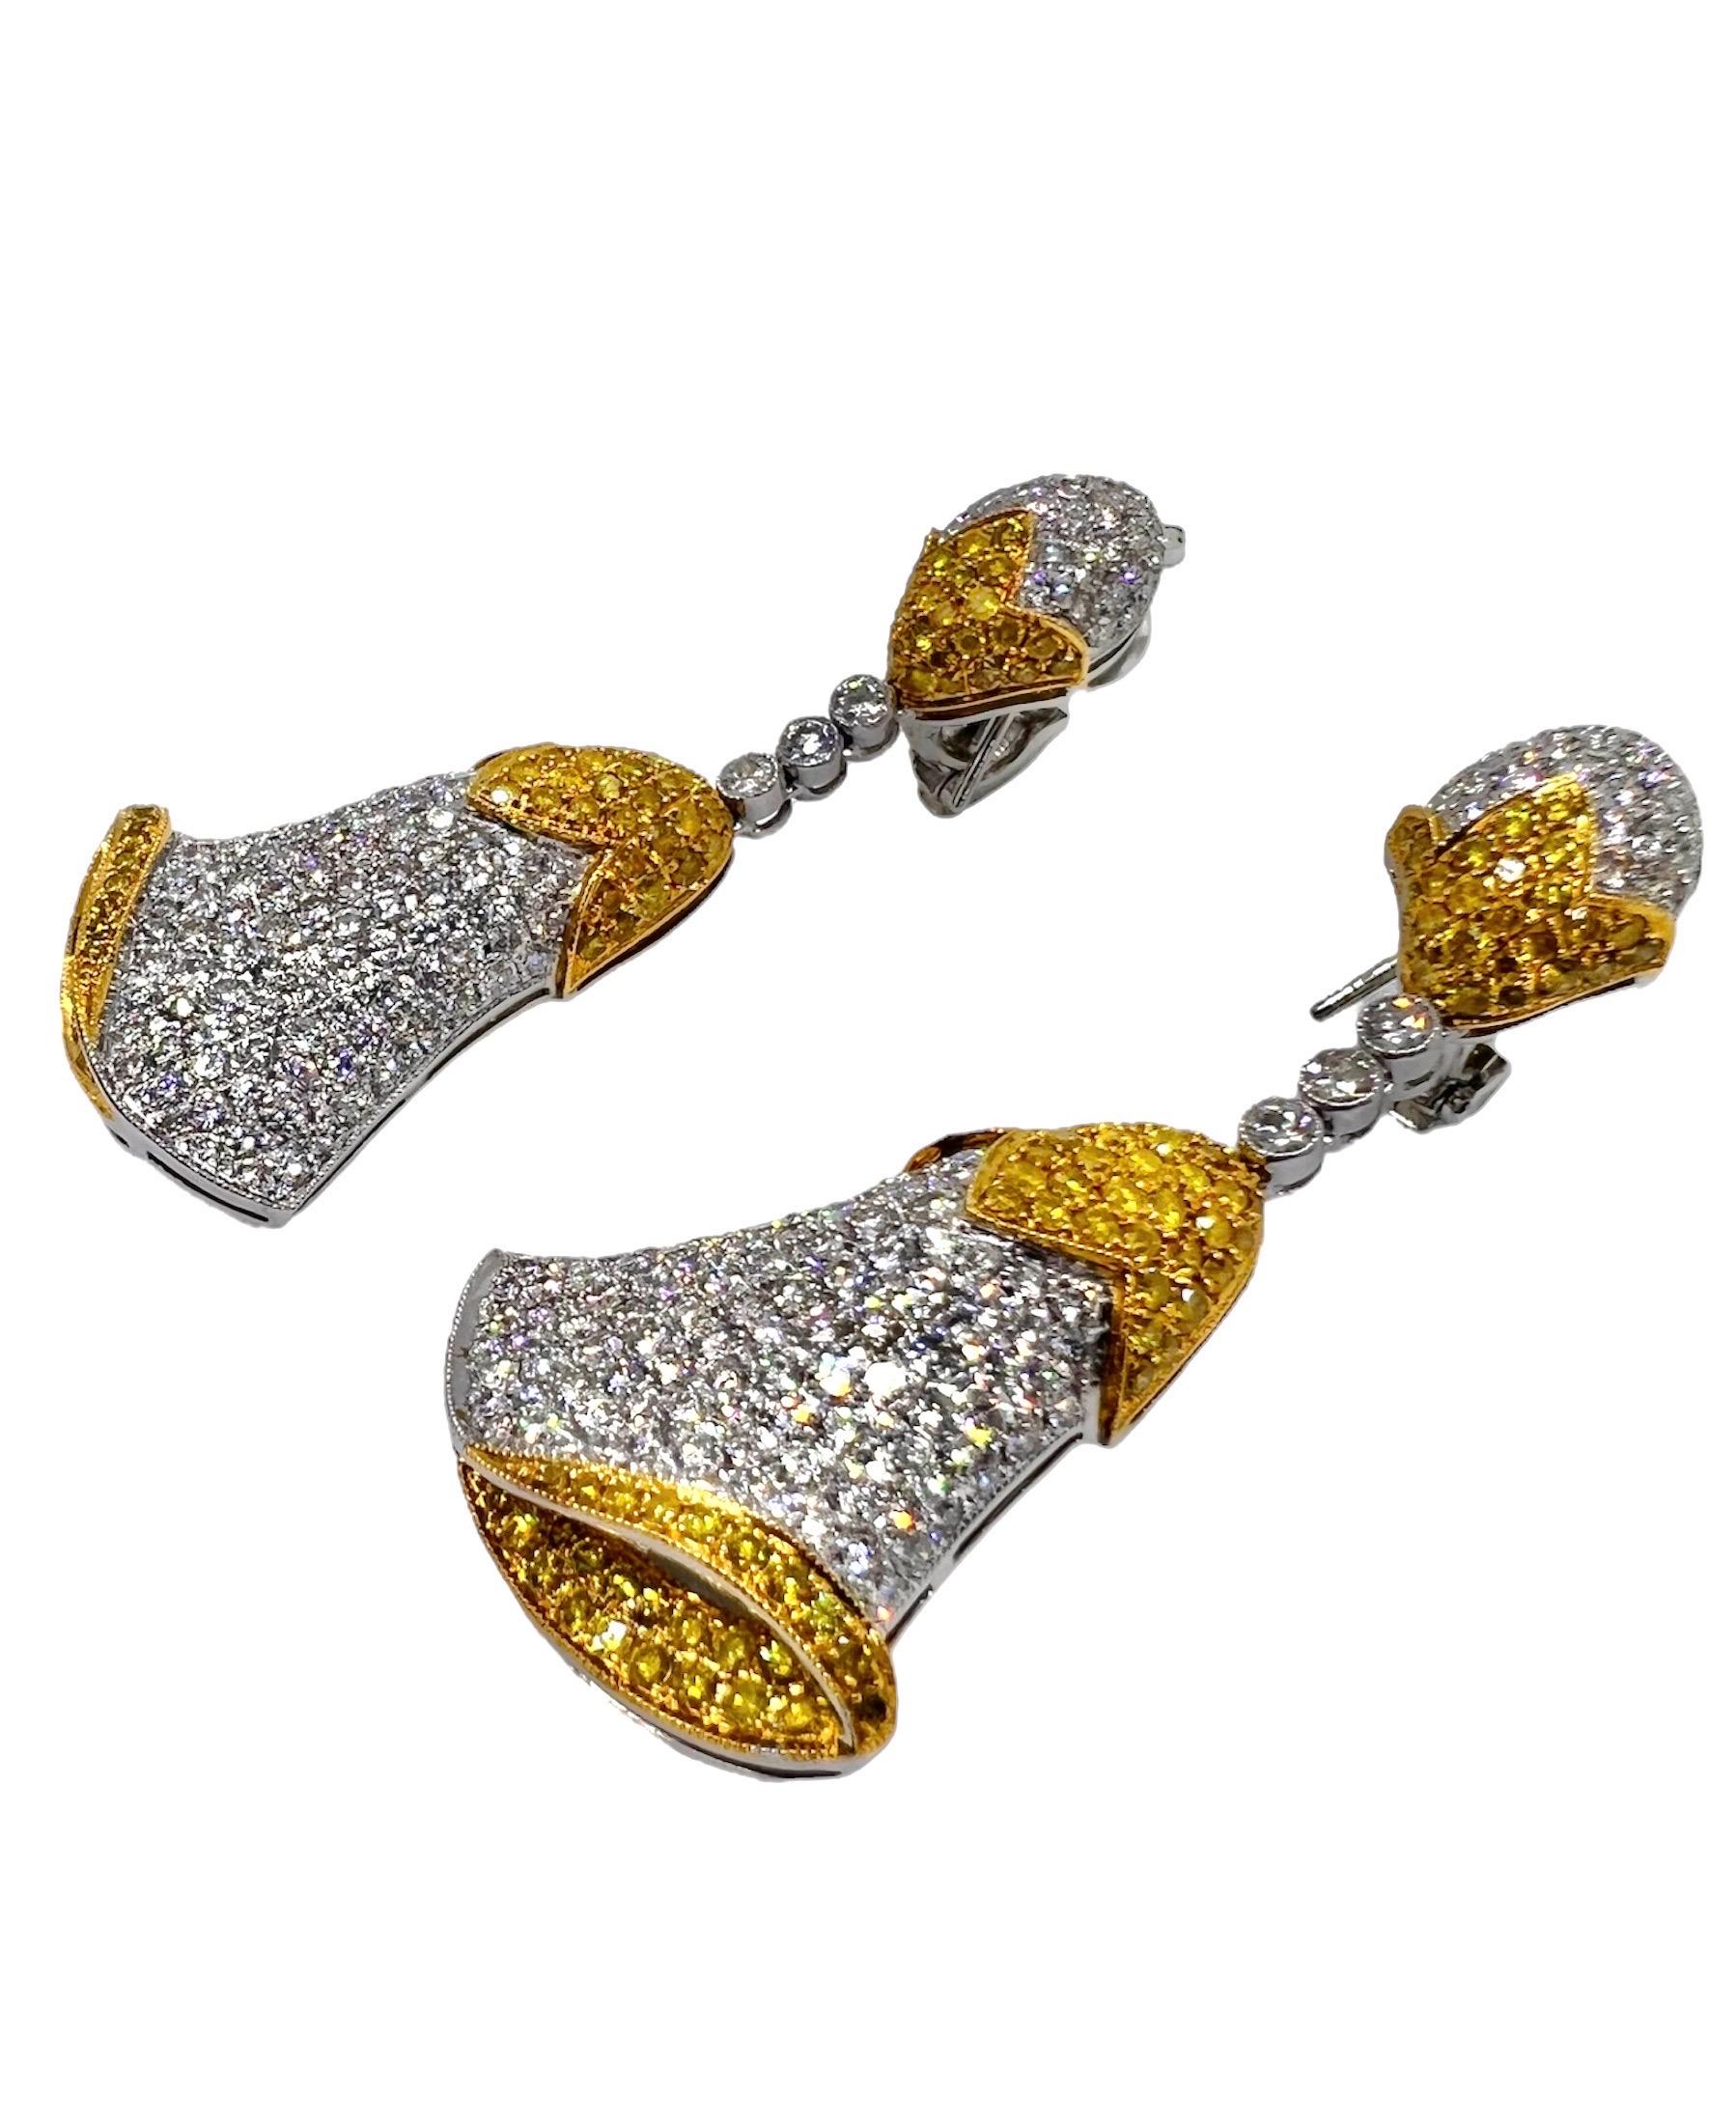 Unique bell inspired earrings designed by Sophia D, these earrings set in platinum features a yellow diamond that weighs 2.60 carats and white diamonds that weighs 5.44 carats.

Sophia D by Joseph Dardashti LTD has been known worldwide for 35 years